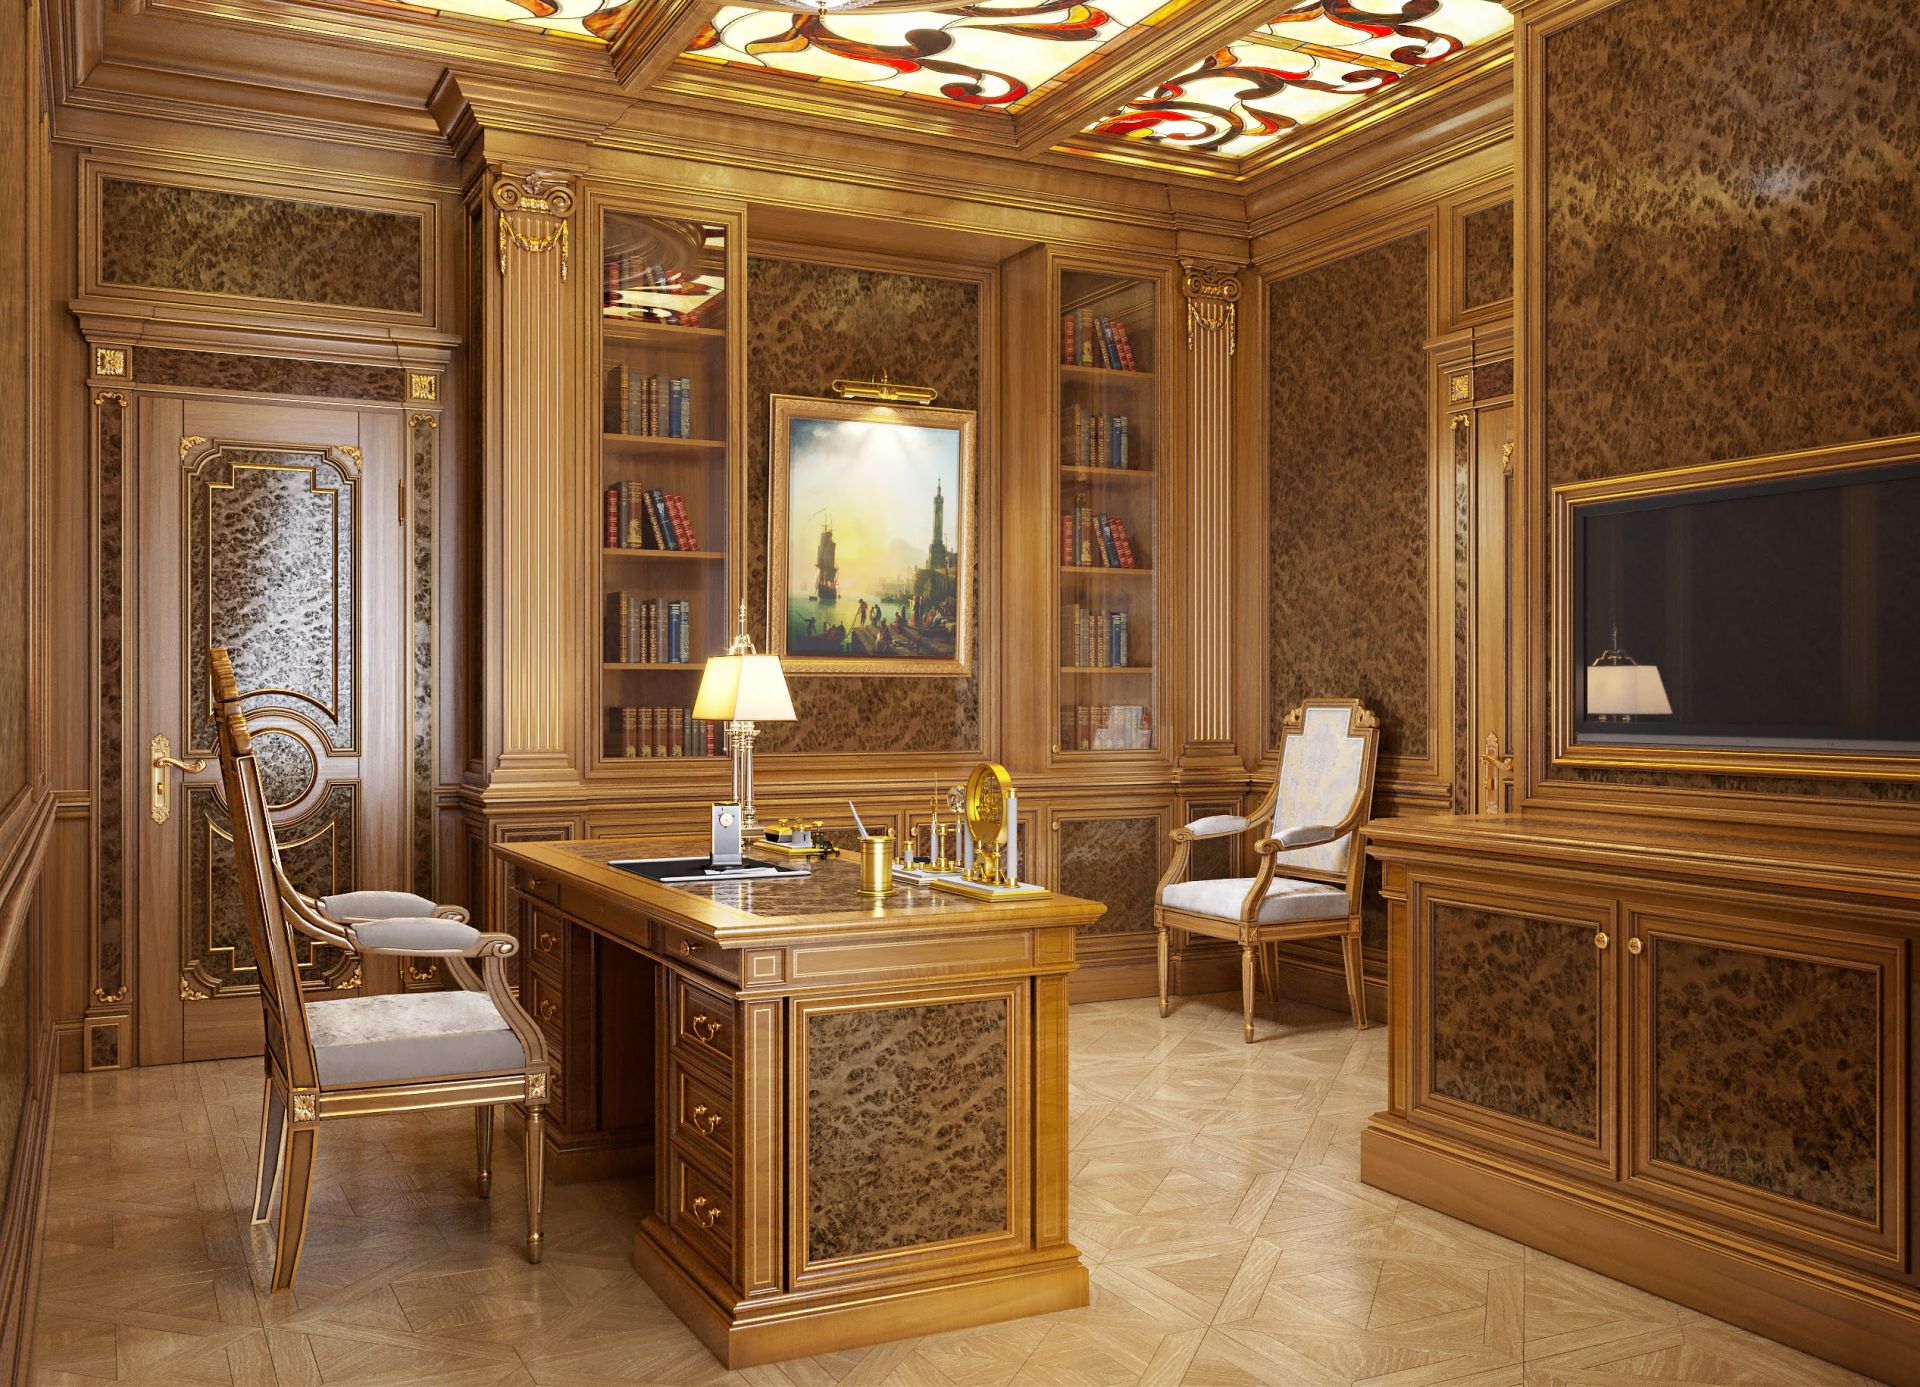 Study interior in a private residence